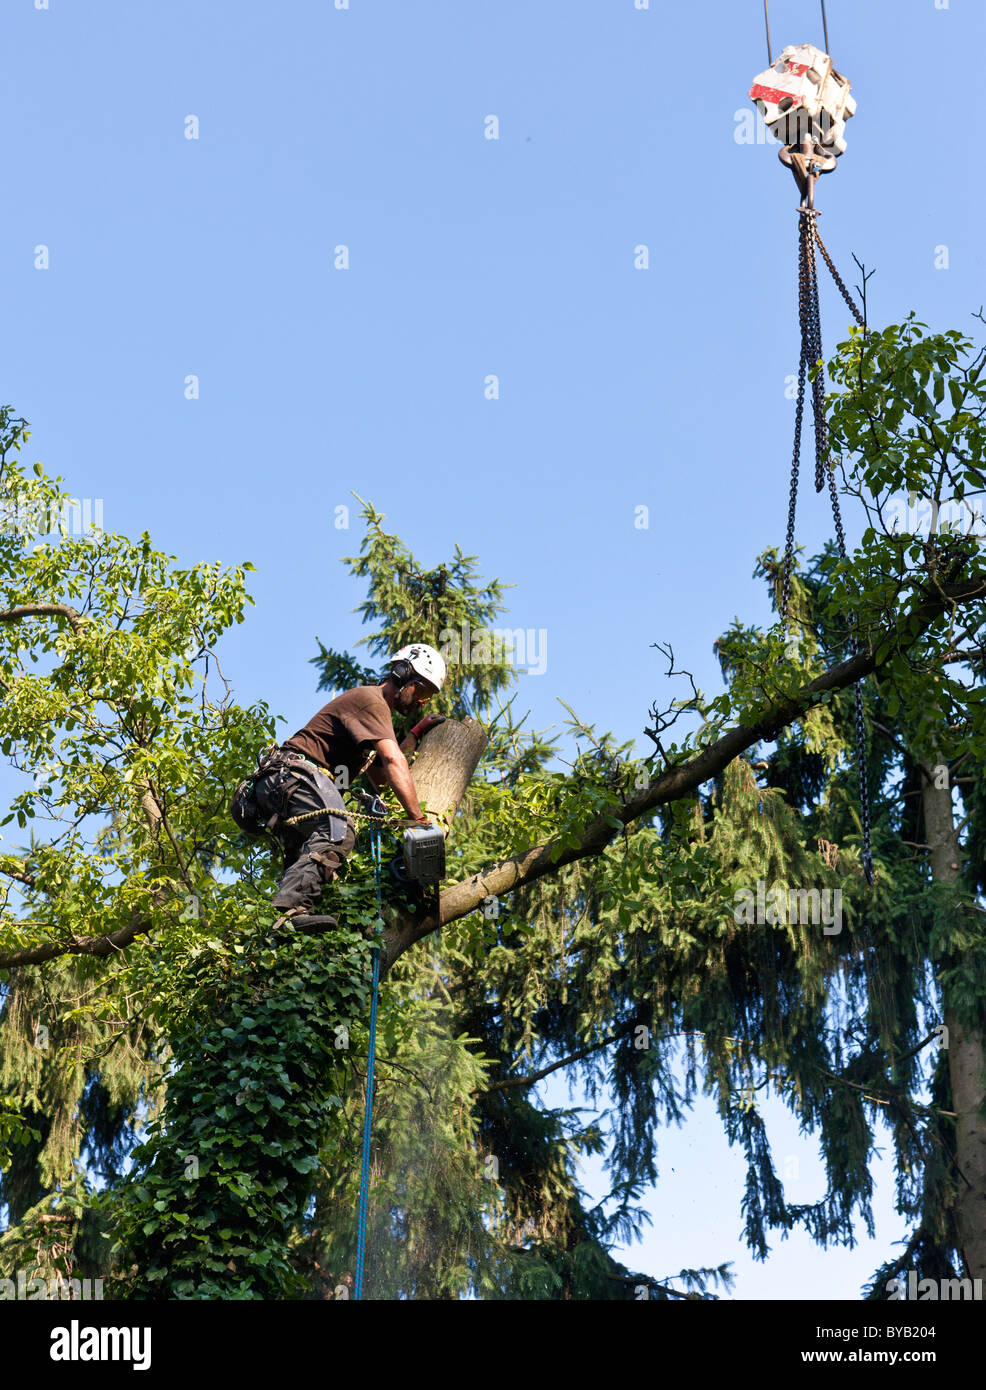 Lumberjack secured by a rope felling a tree piece by piece with a